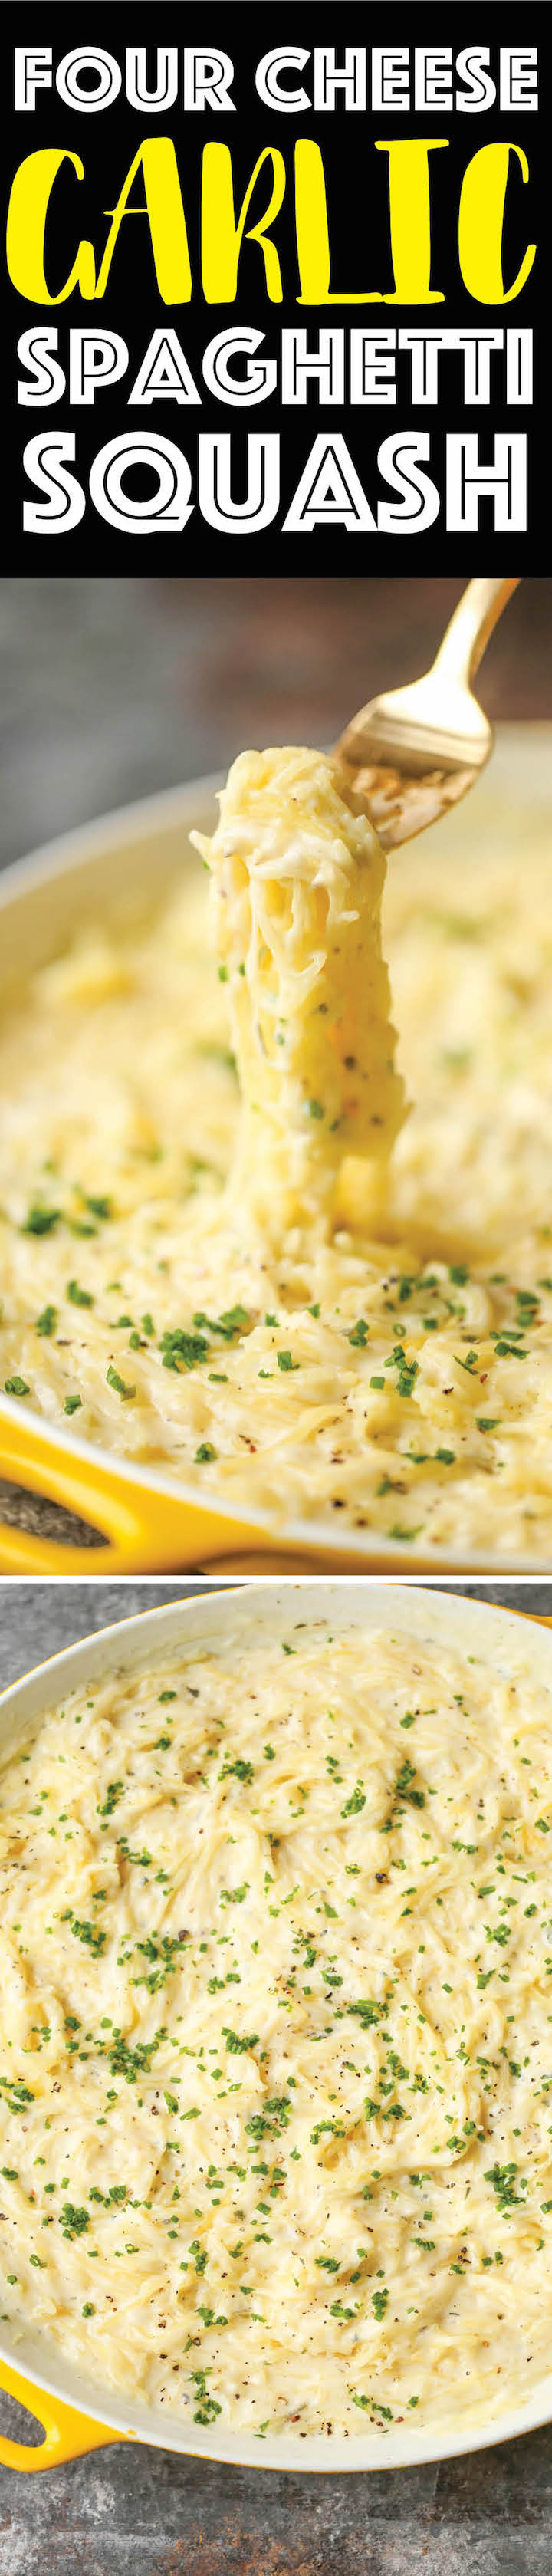 Four Cheese Garlic Spaghetti Squash - A skinny version of everyone's favorite comfort food. It's quick, easy, healthy and nutritious! Win-win all around!